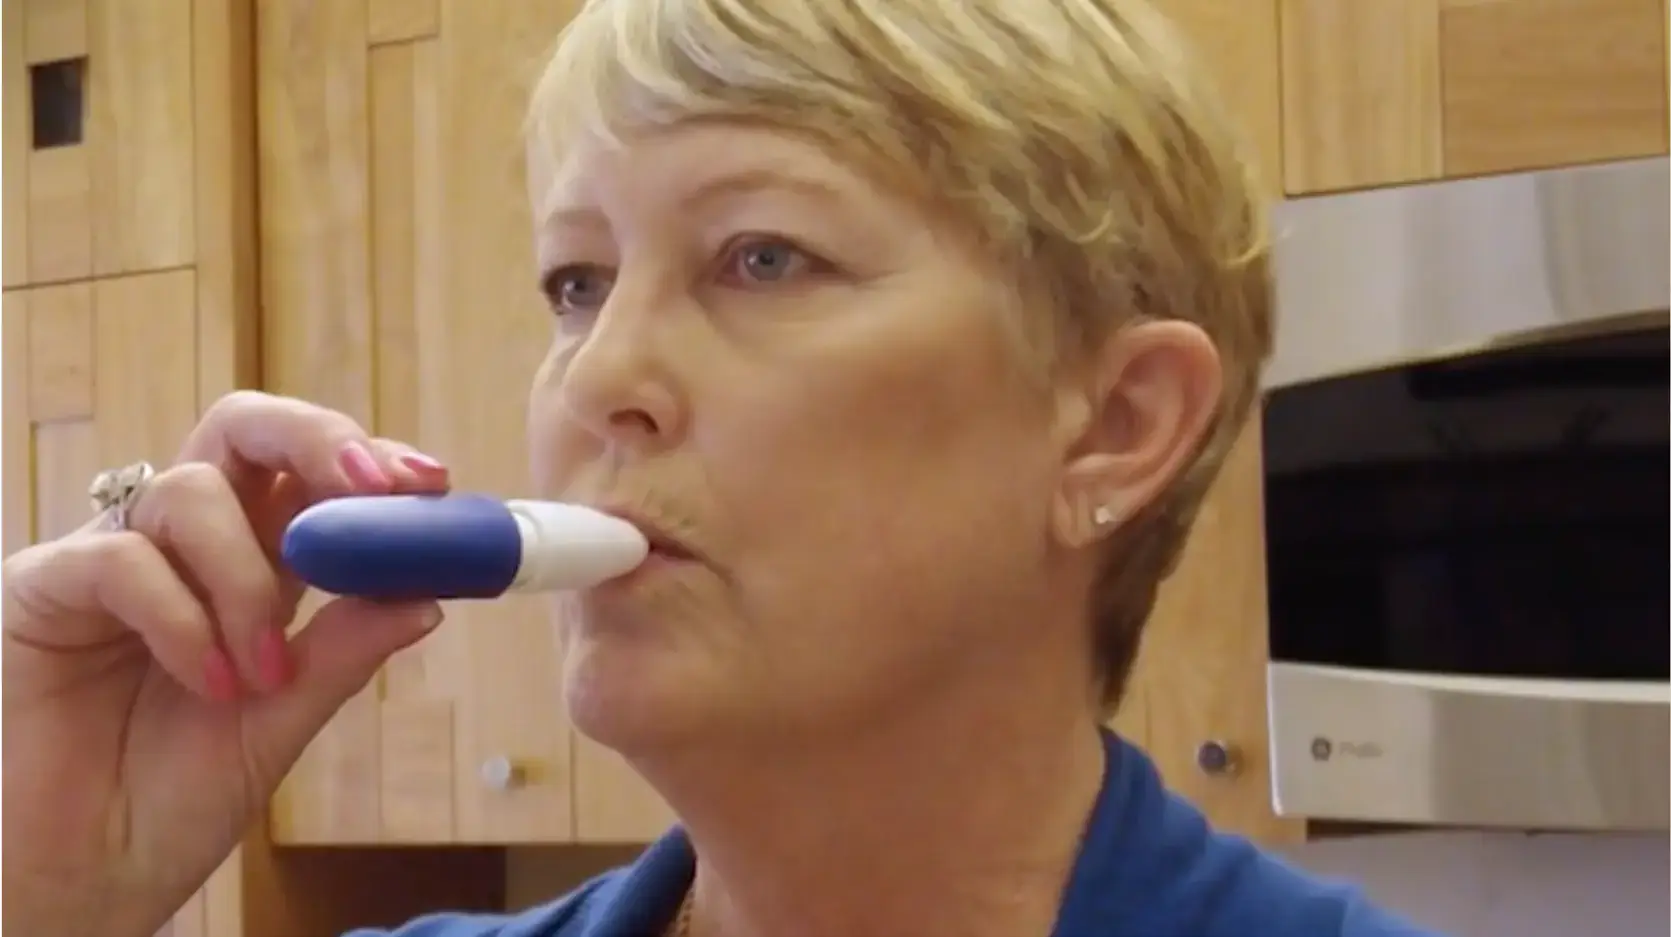 A woman with short blond hair holds the INBRIJA inhaler to her mouth. Text on the bottom right reads "Stephanie's Story"